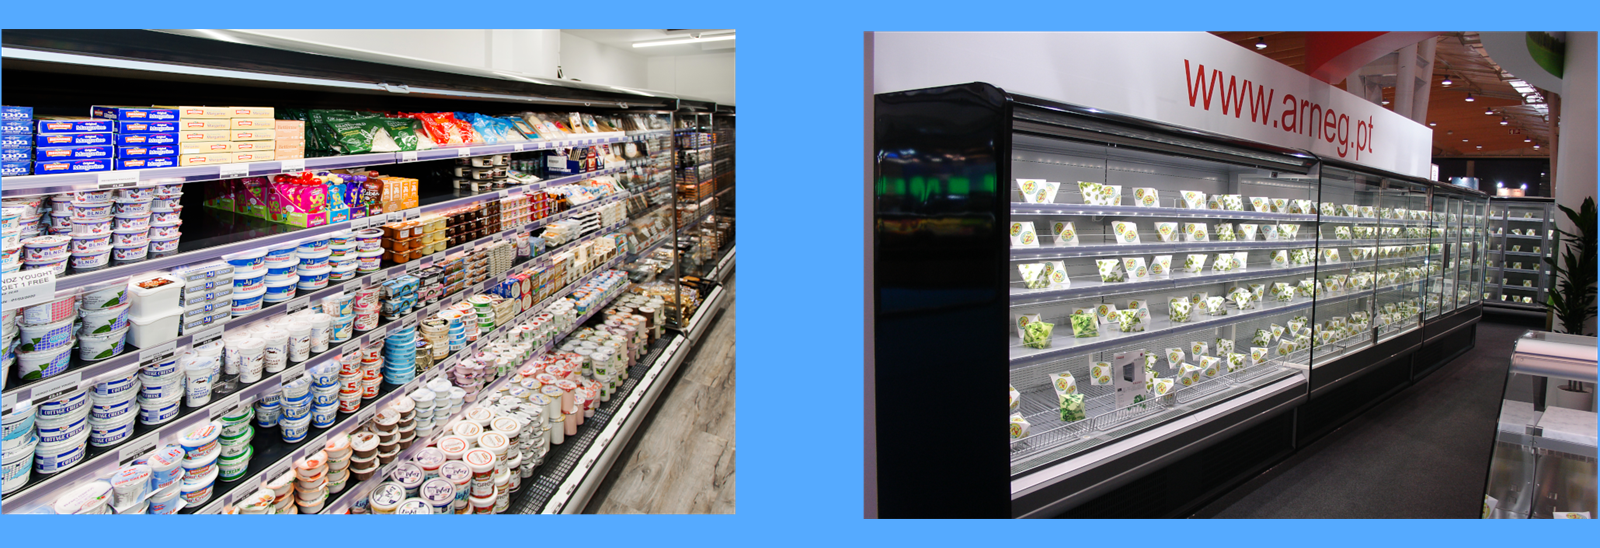 Thornbury Refrigeration can supply frozen or refrigerated chillers 